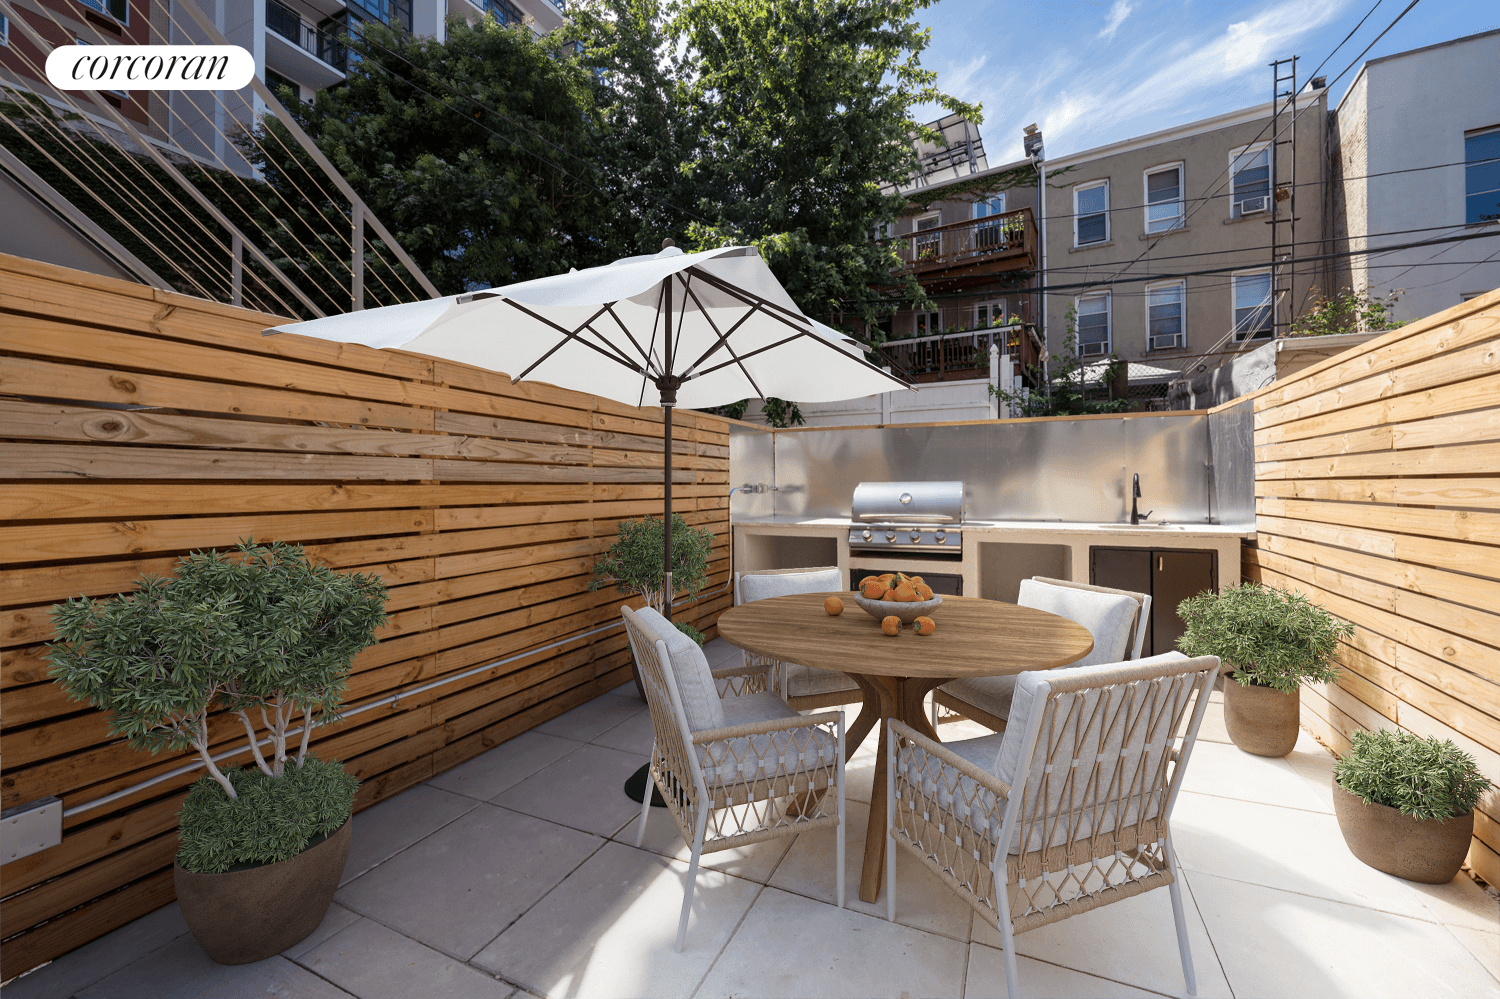 Welcome to the garden level duplex at 96 16th Street, Brooklyn.